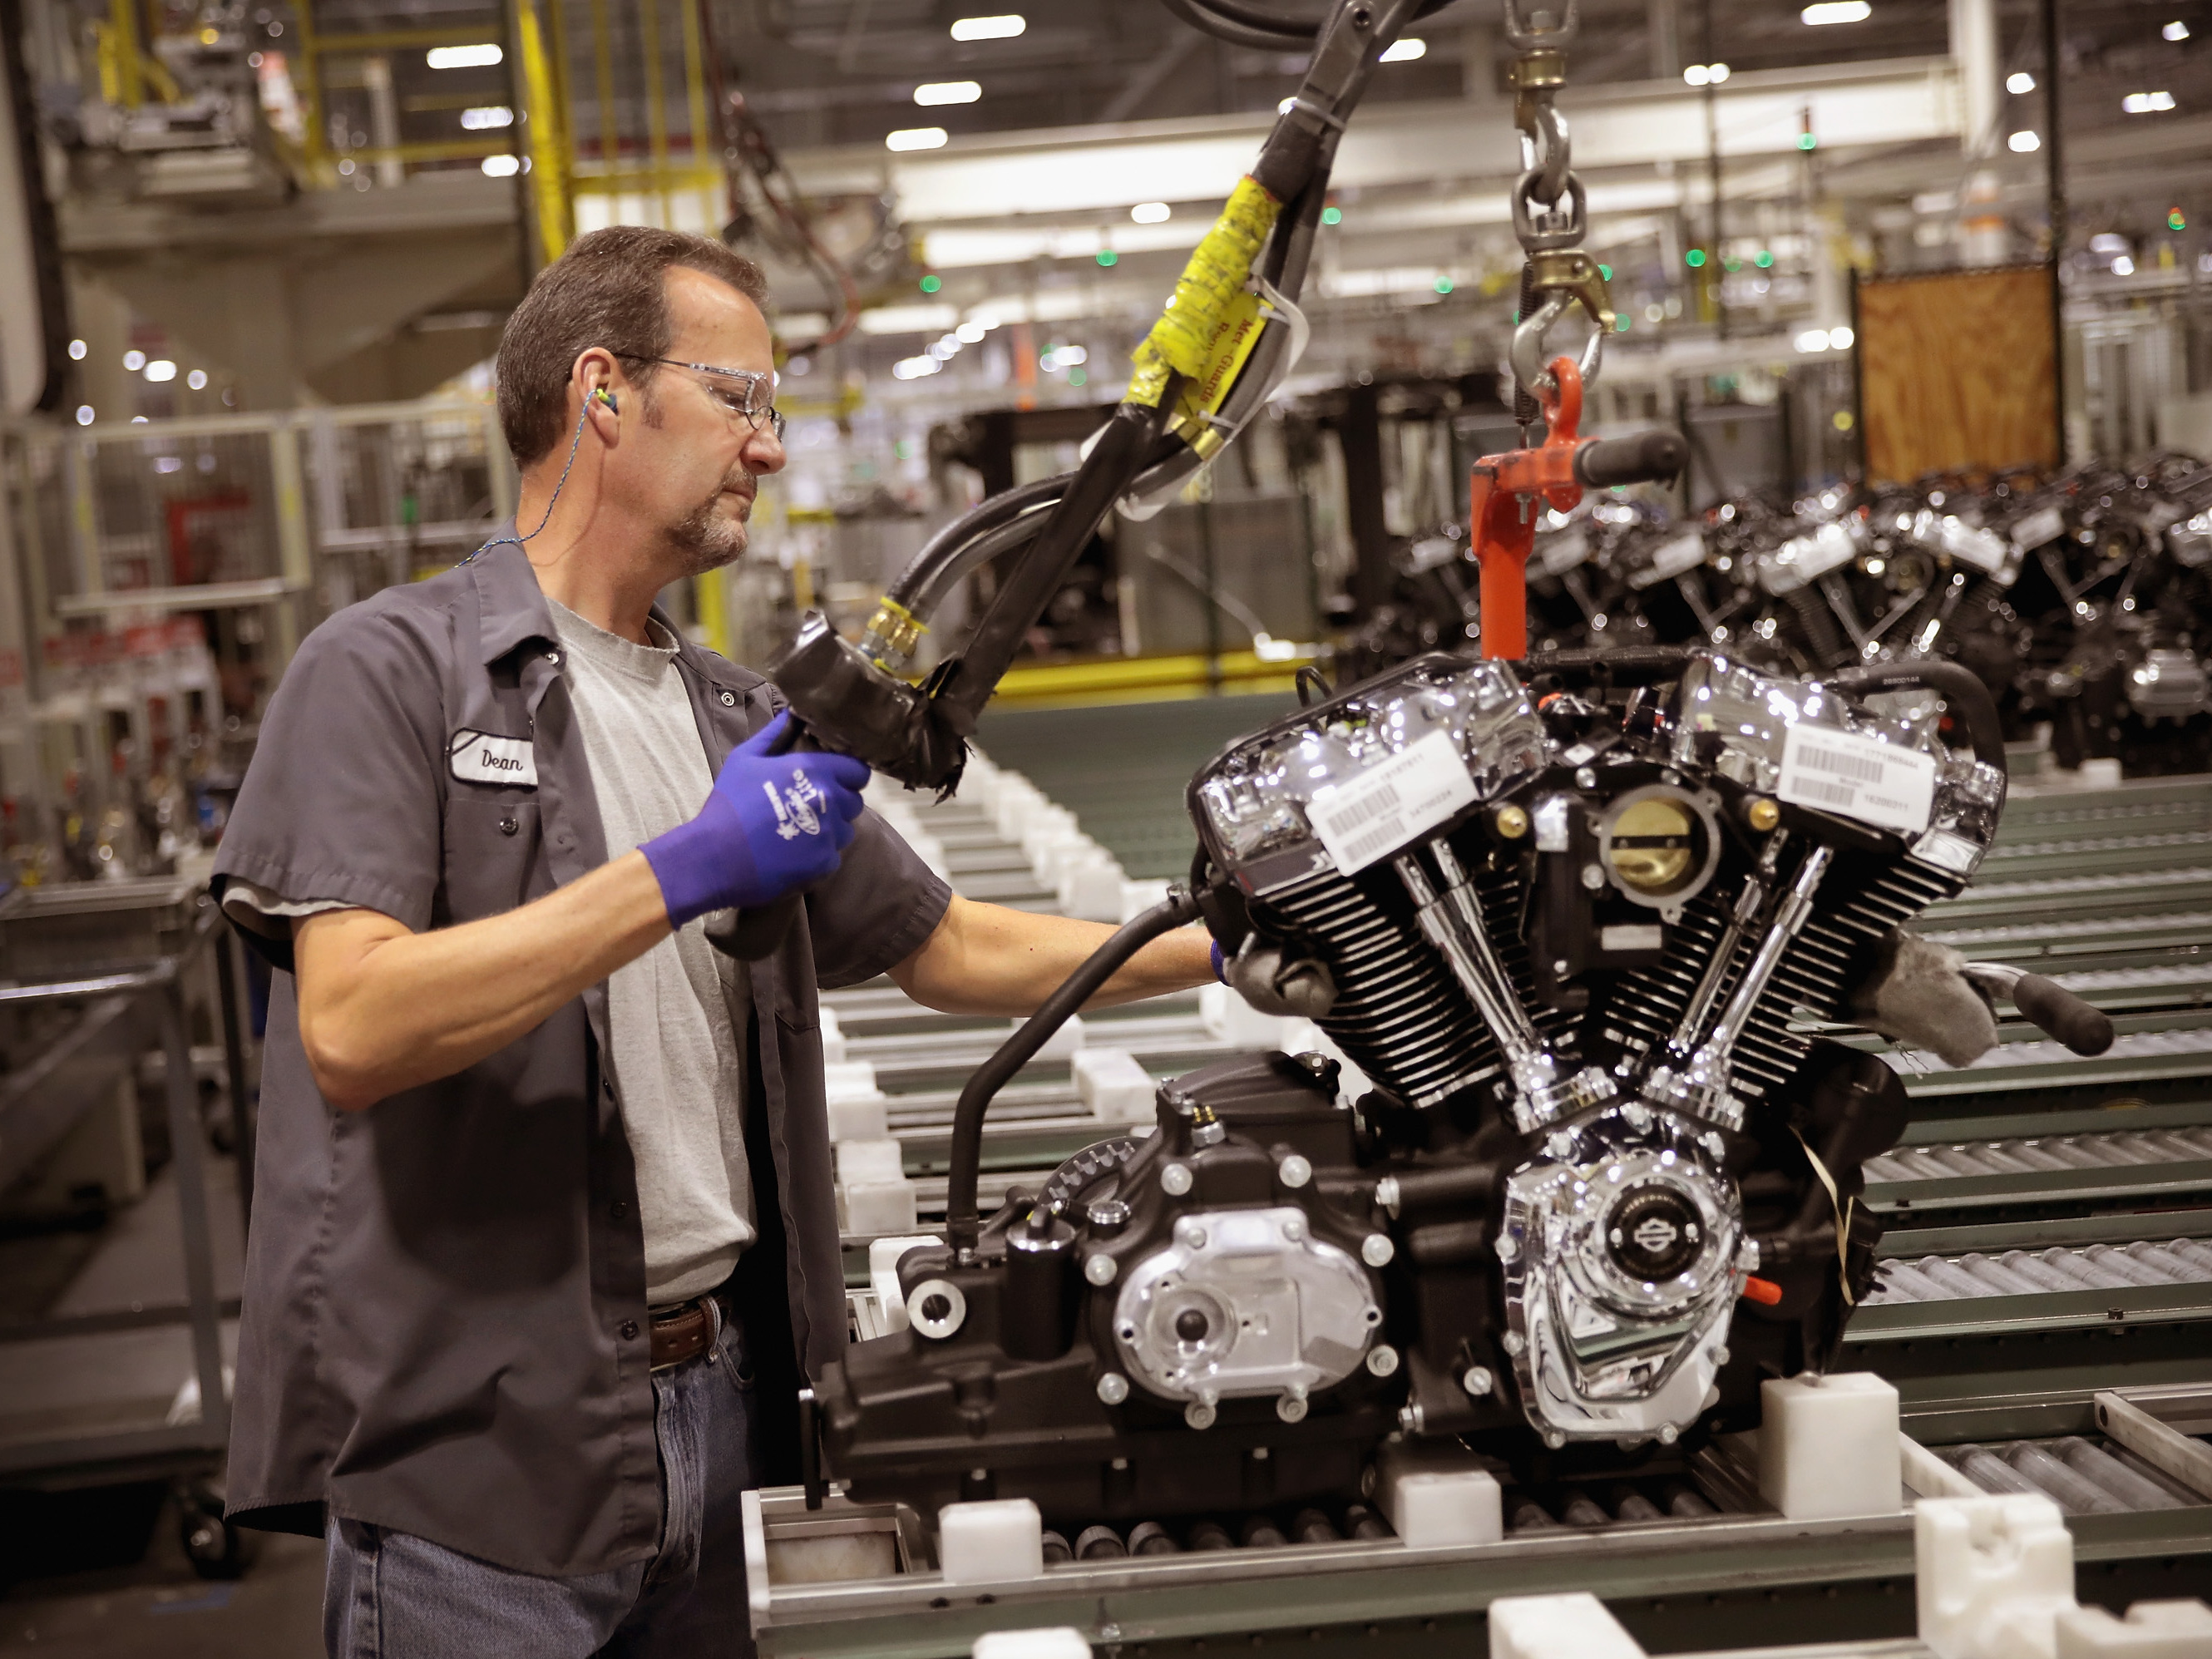 Harley-Davidson motorcycle engines are assembled at the company's plant in Menomonee Falls, Wis. Tariffs from the European Union are prompting the company to shift production of some motorcycles for the European market overseas.